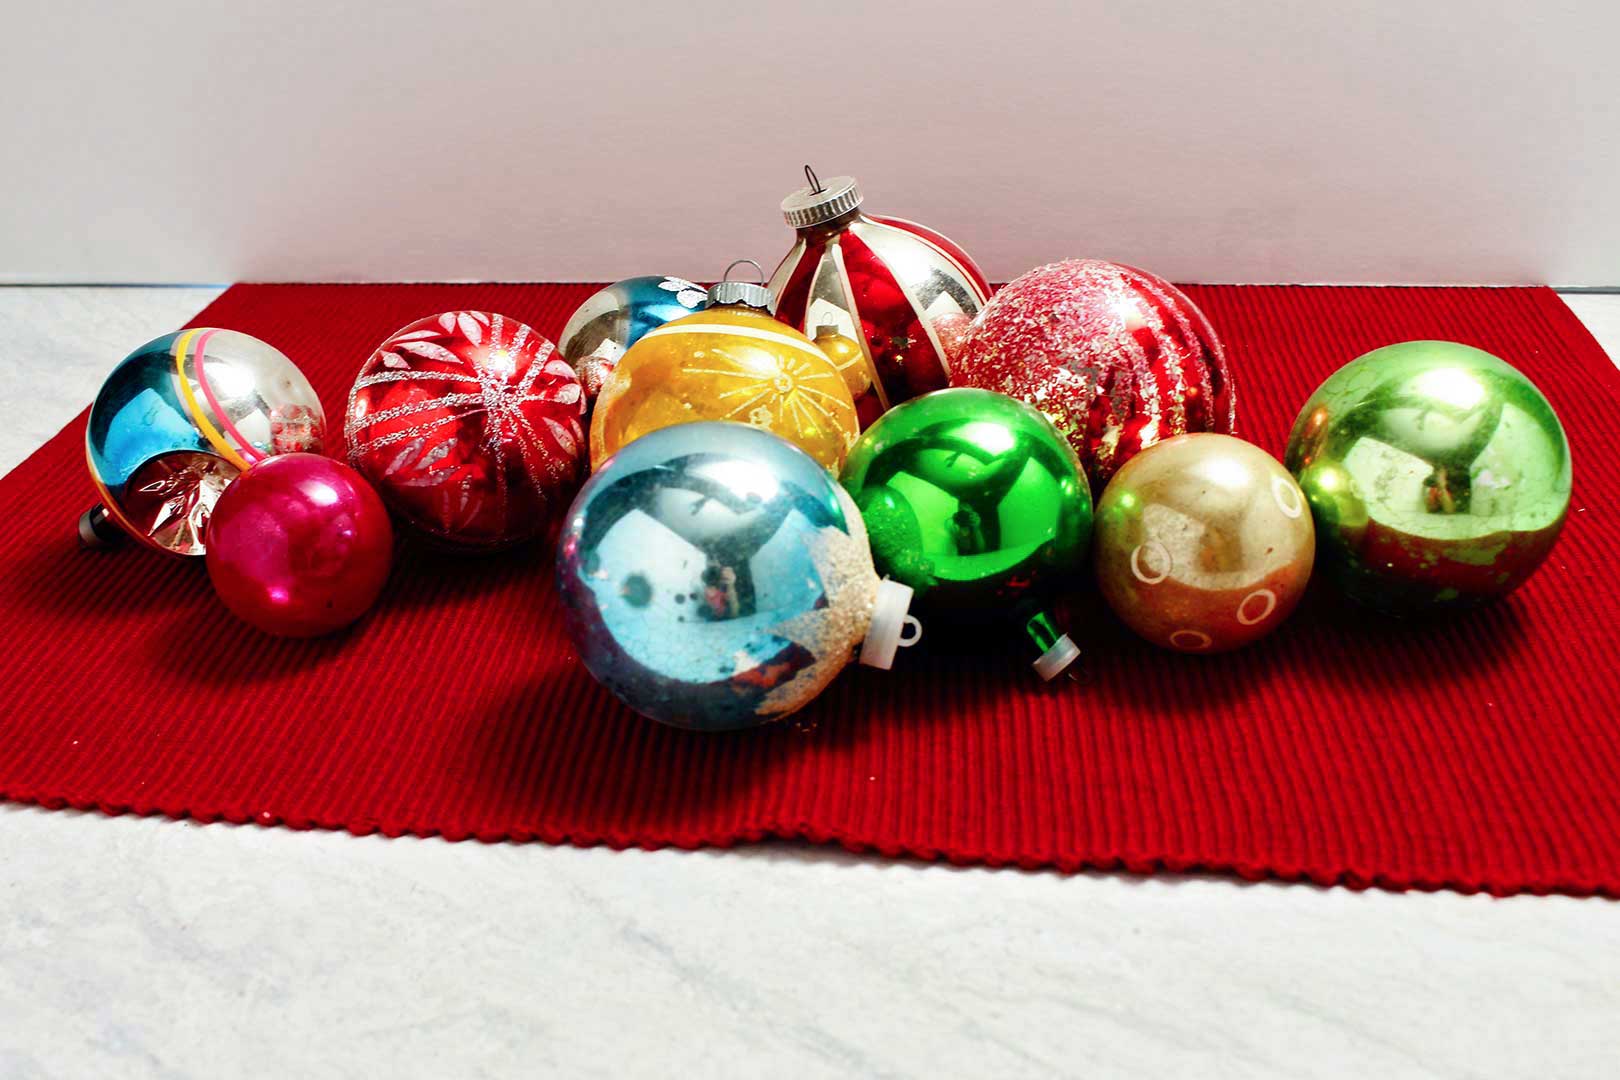 Christmas ornaments lay on a red placemat.